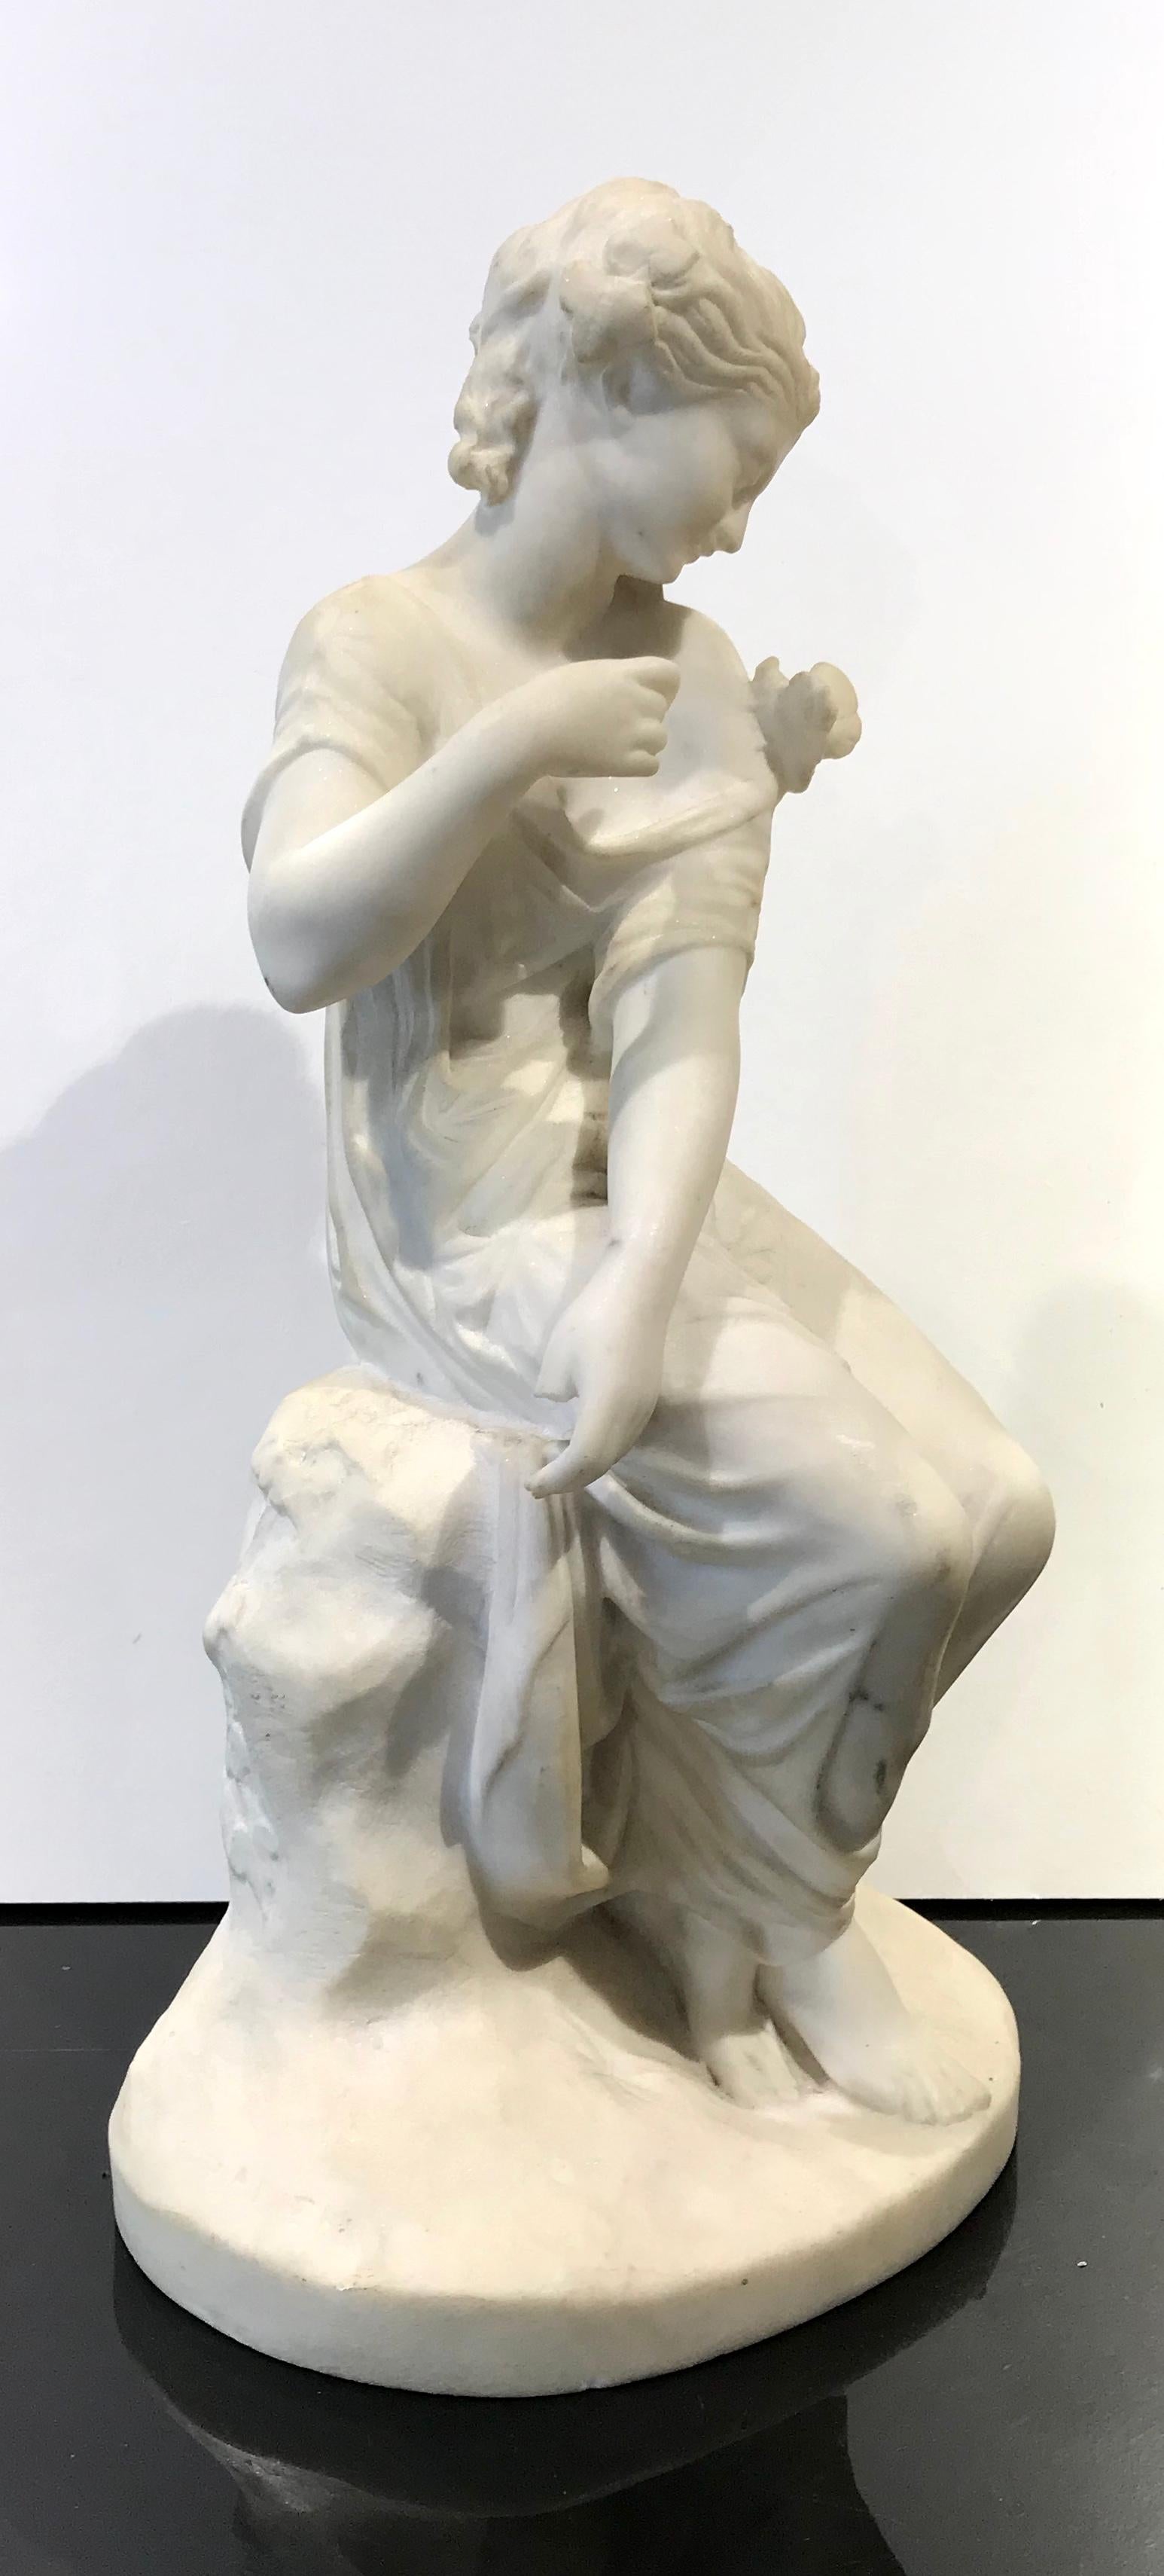 Hand-Carved 19th Century French Marble Sculpture of Psyche by James Pradier Signed